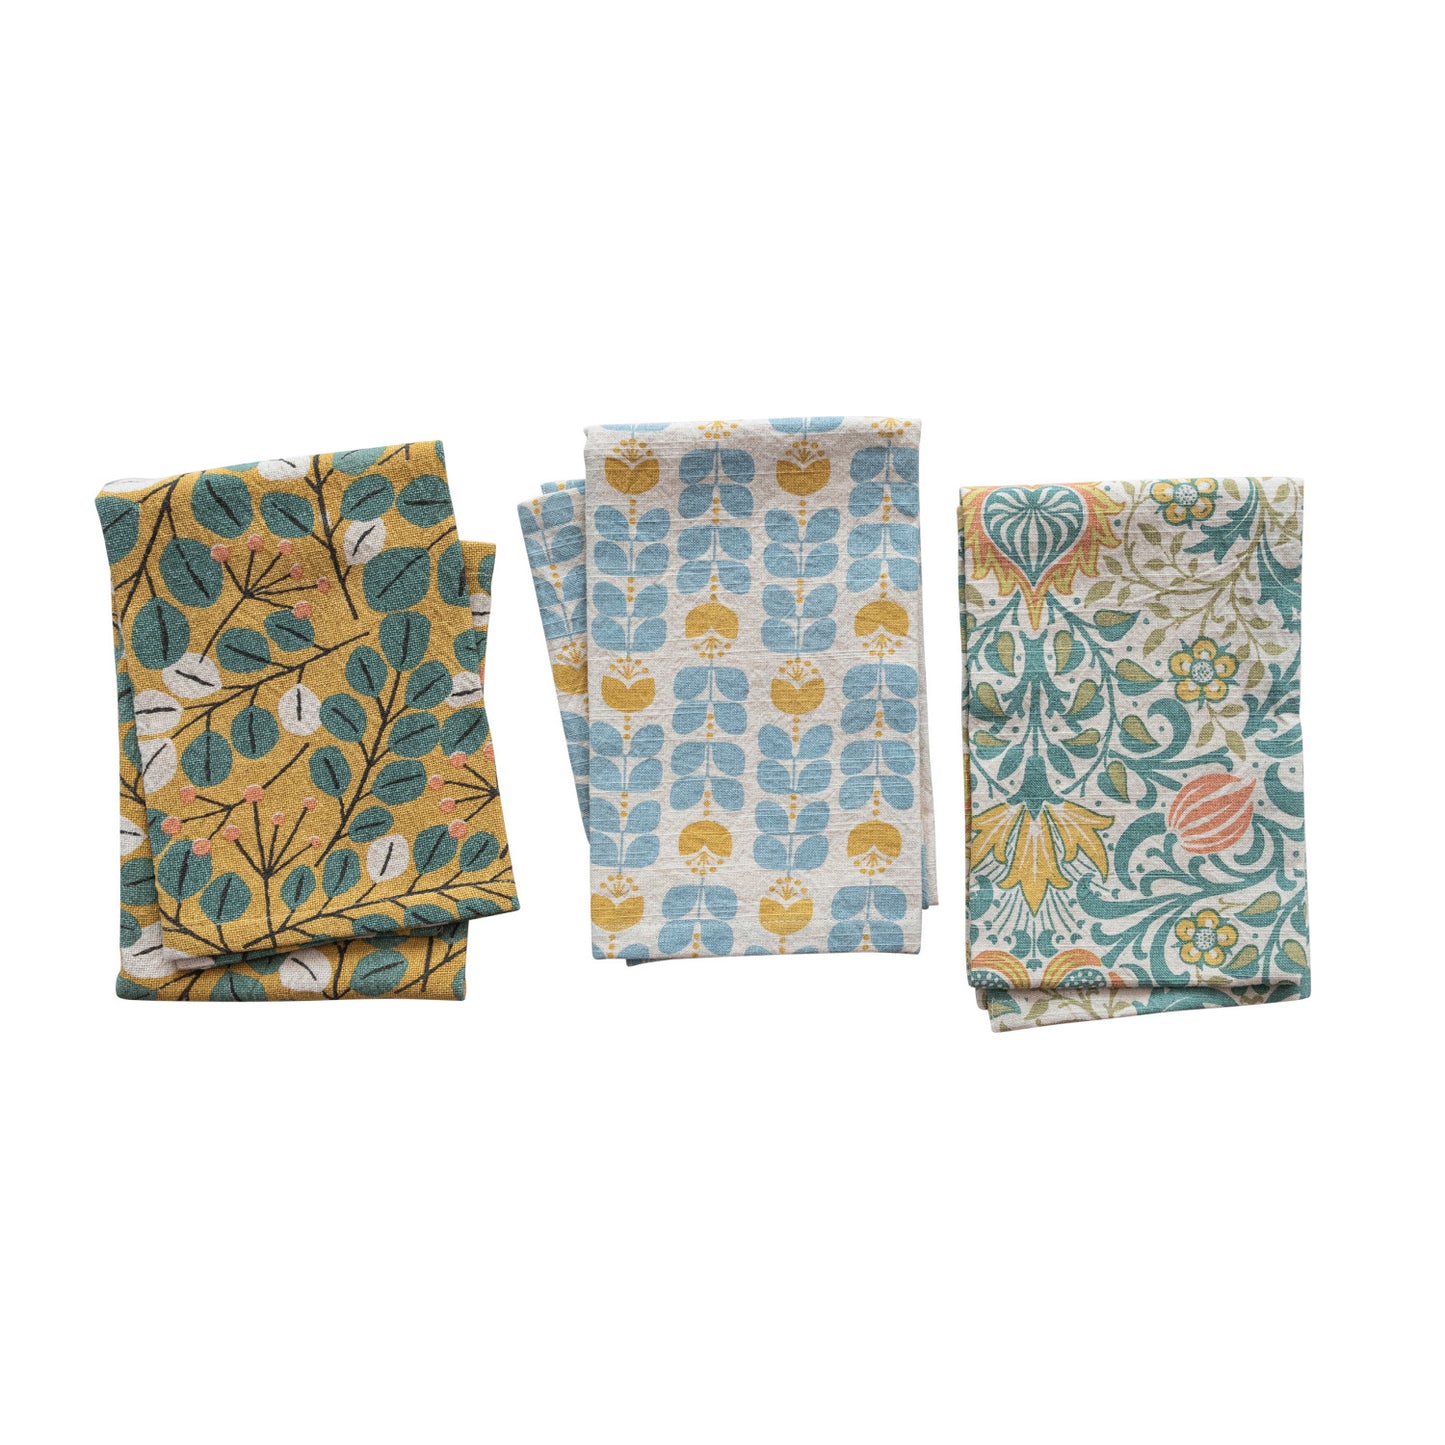 Printed Tea Towels with Botanical Pattern